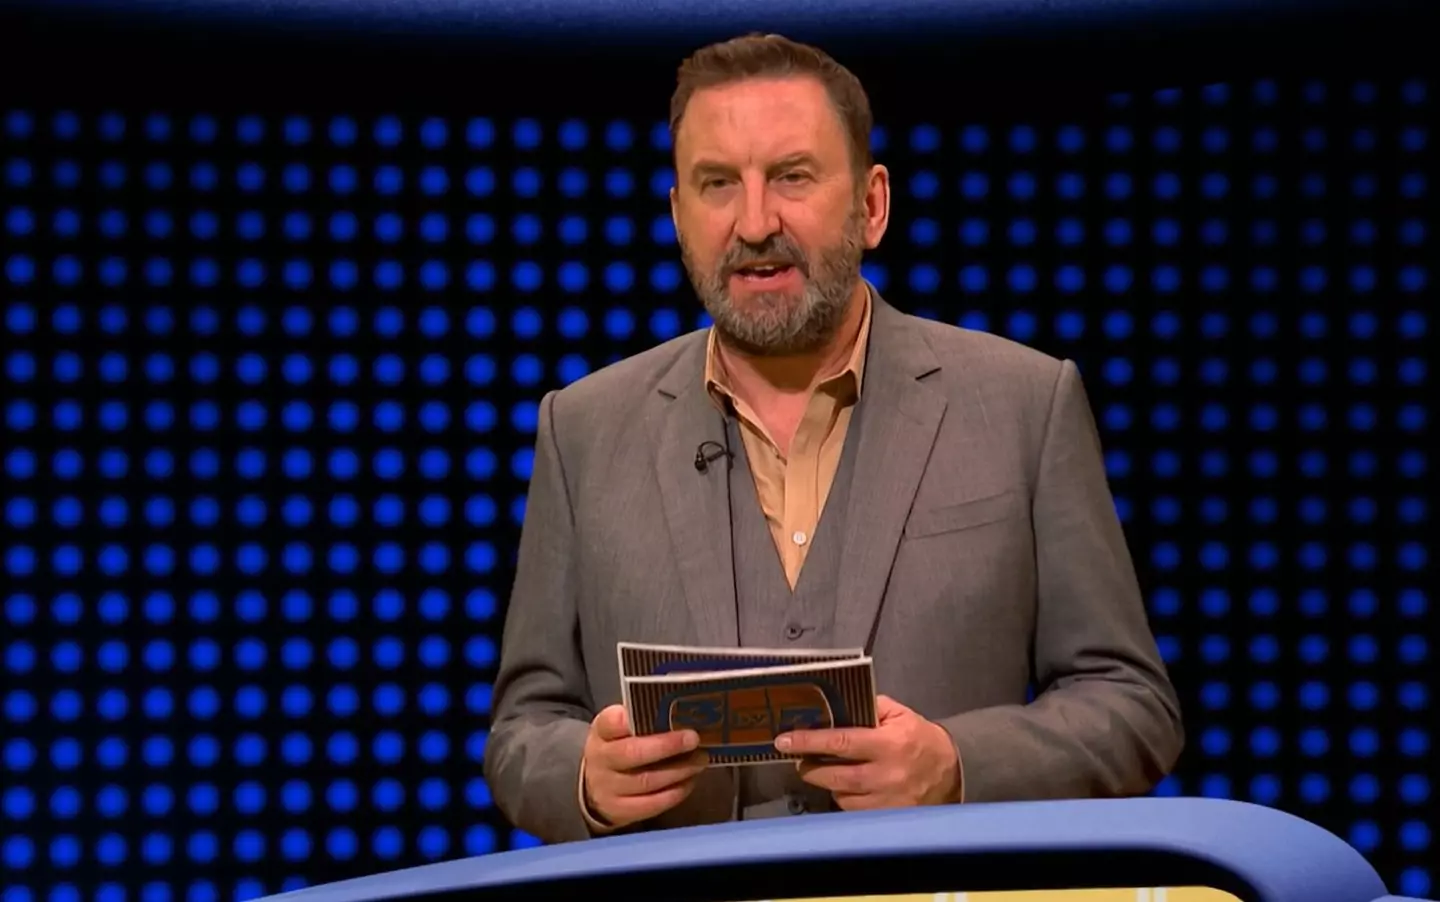 Lee Mack hosted the one-off quiz special.